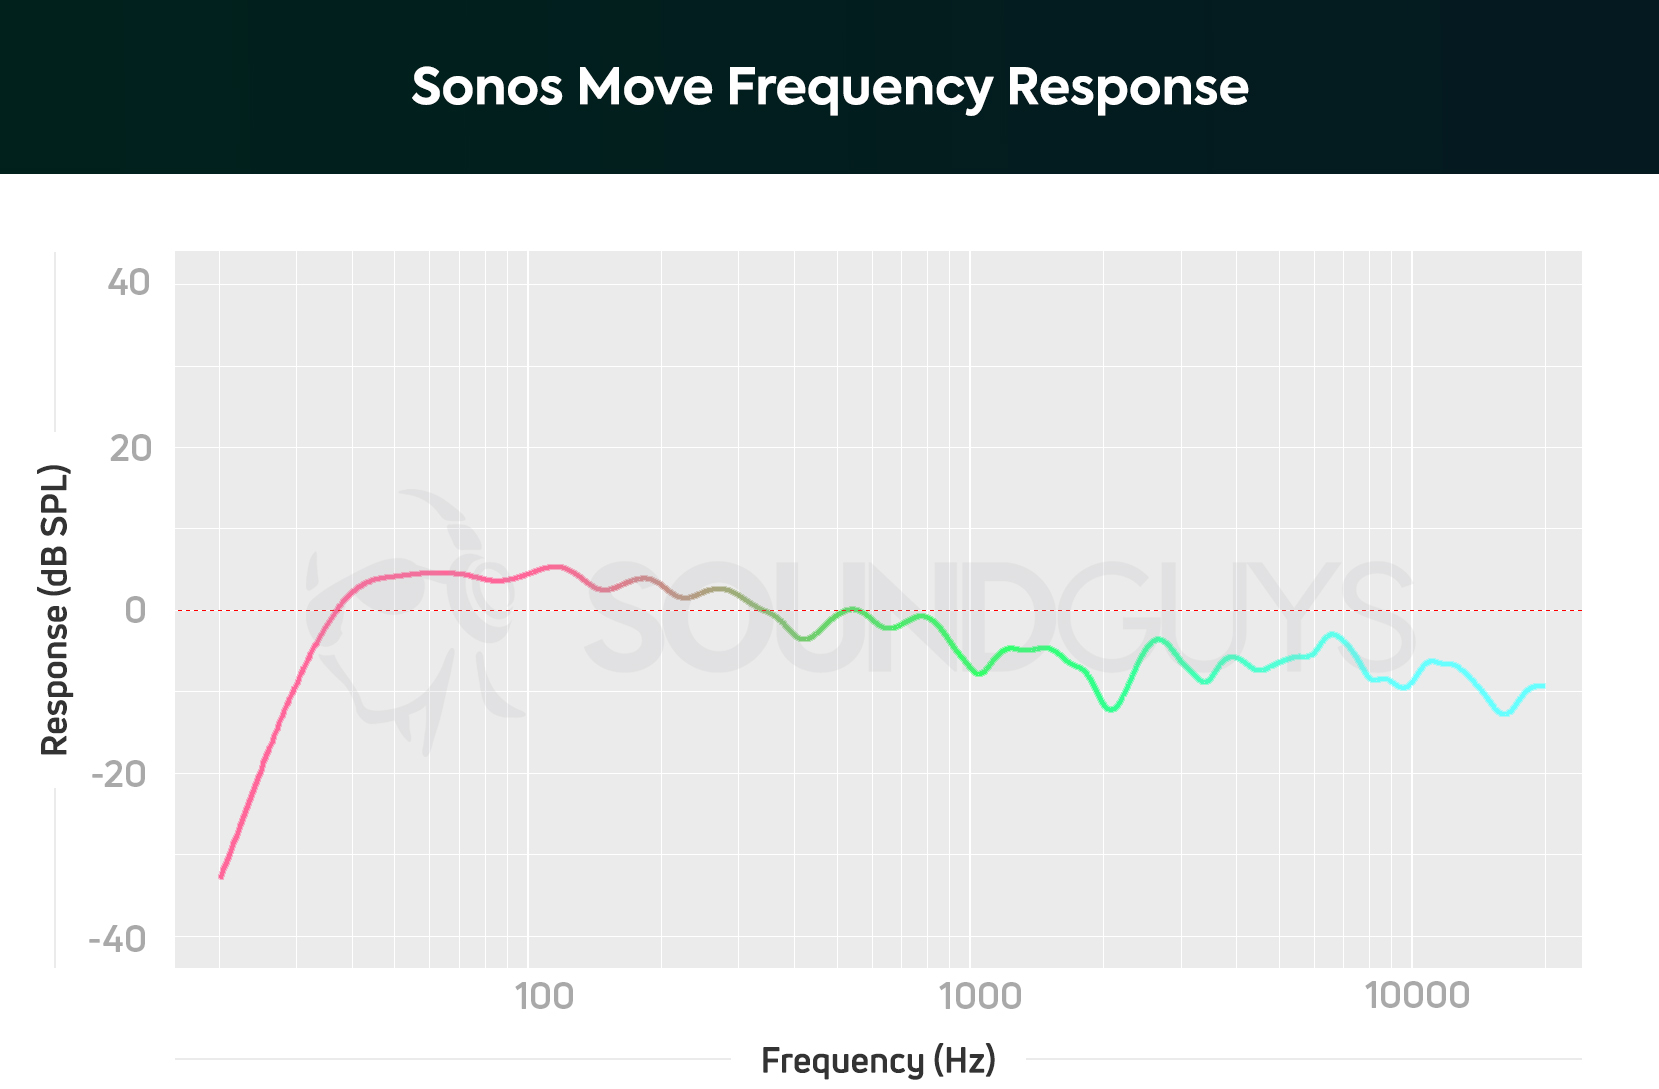 Sonos Move frequency response graph showing slight emphasis on lows around 100Hz with a dip after 1kHz